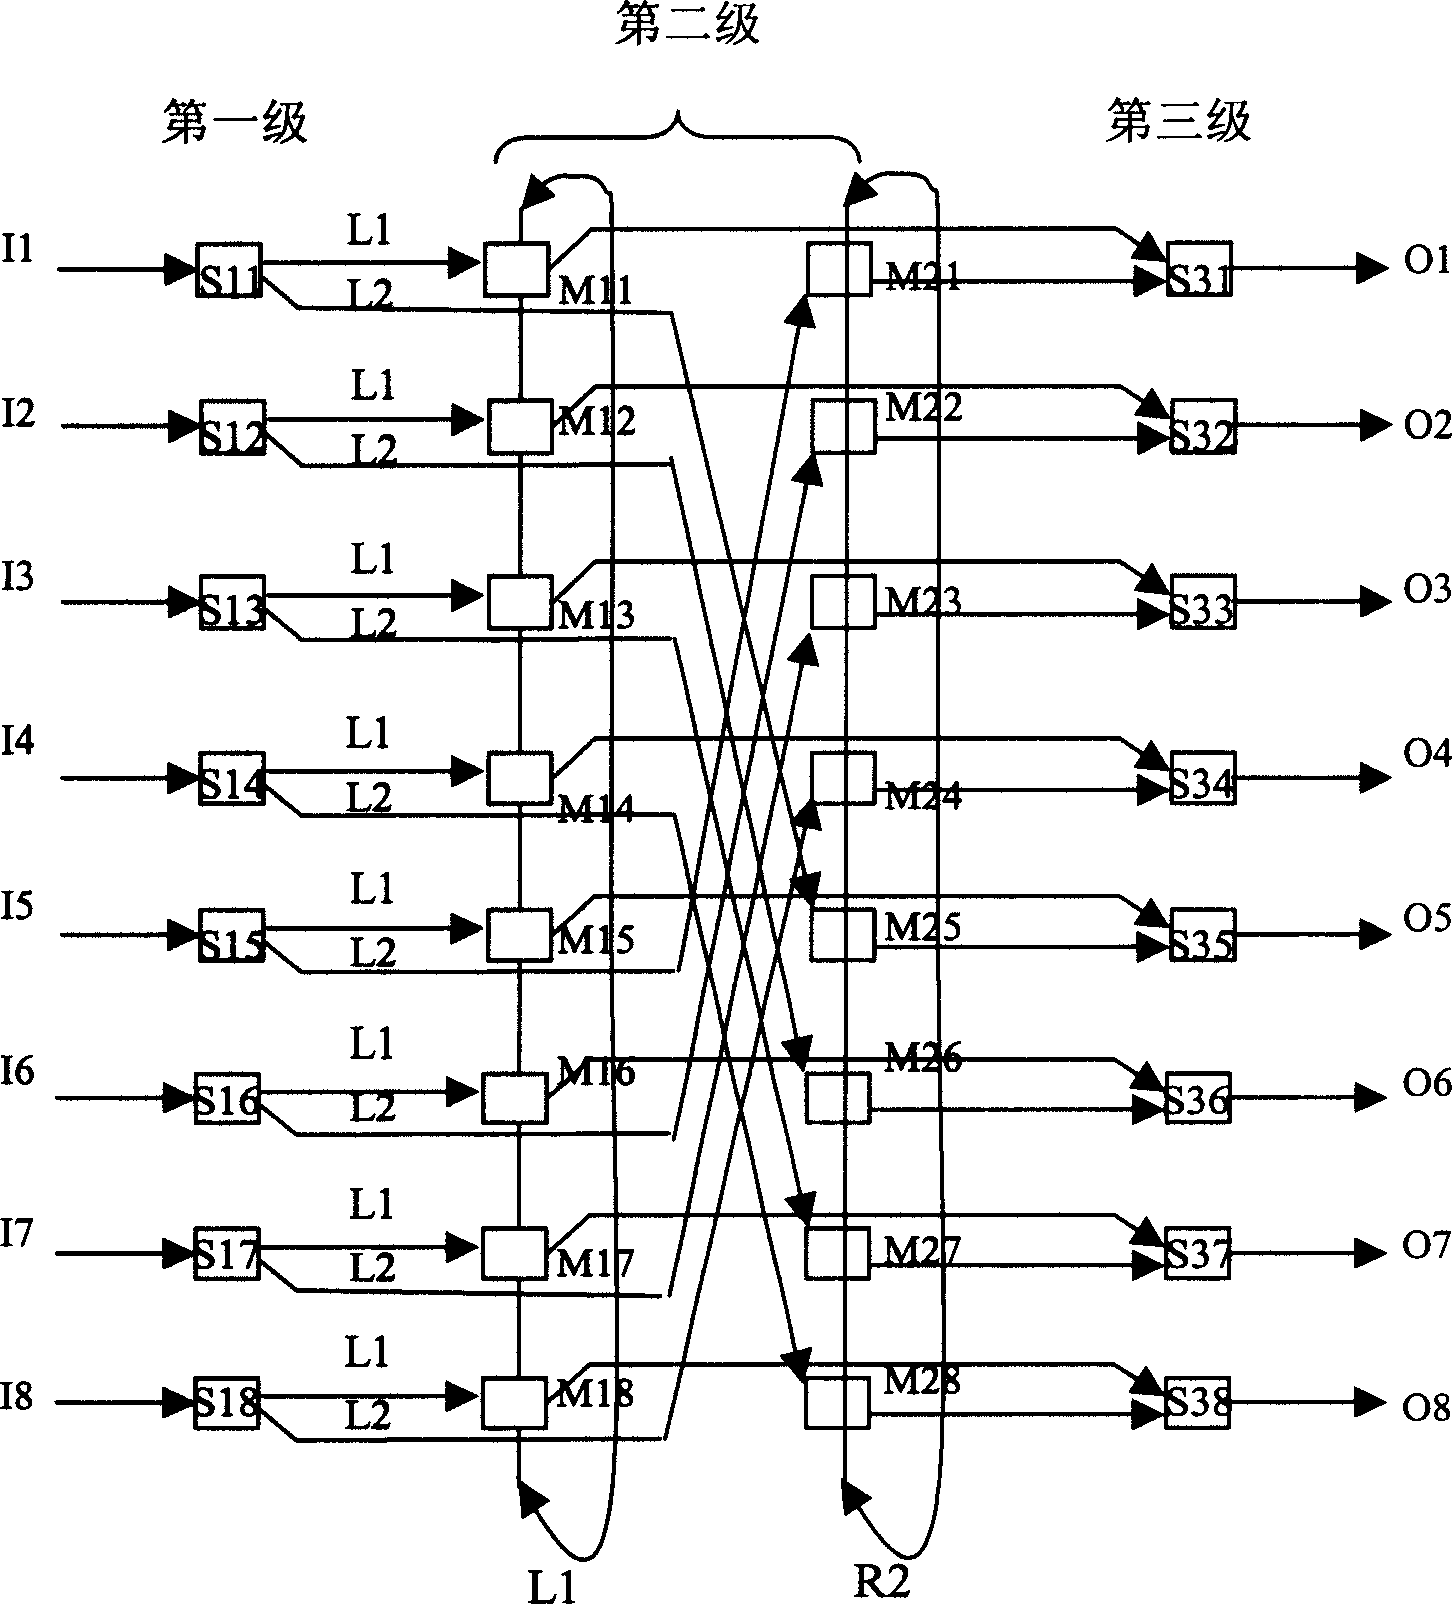 Rings based high capacity expandable packet switching network arrangement